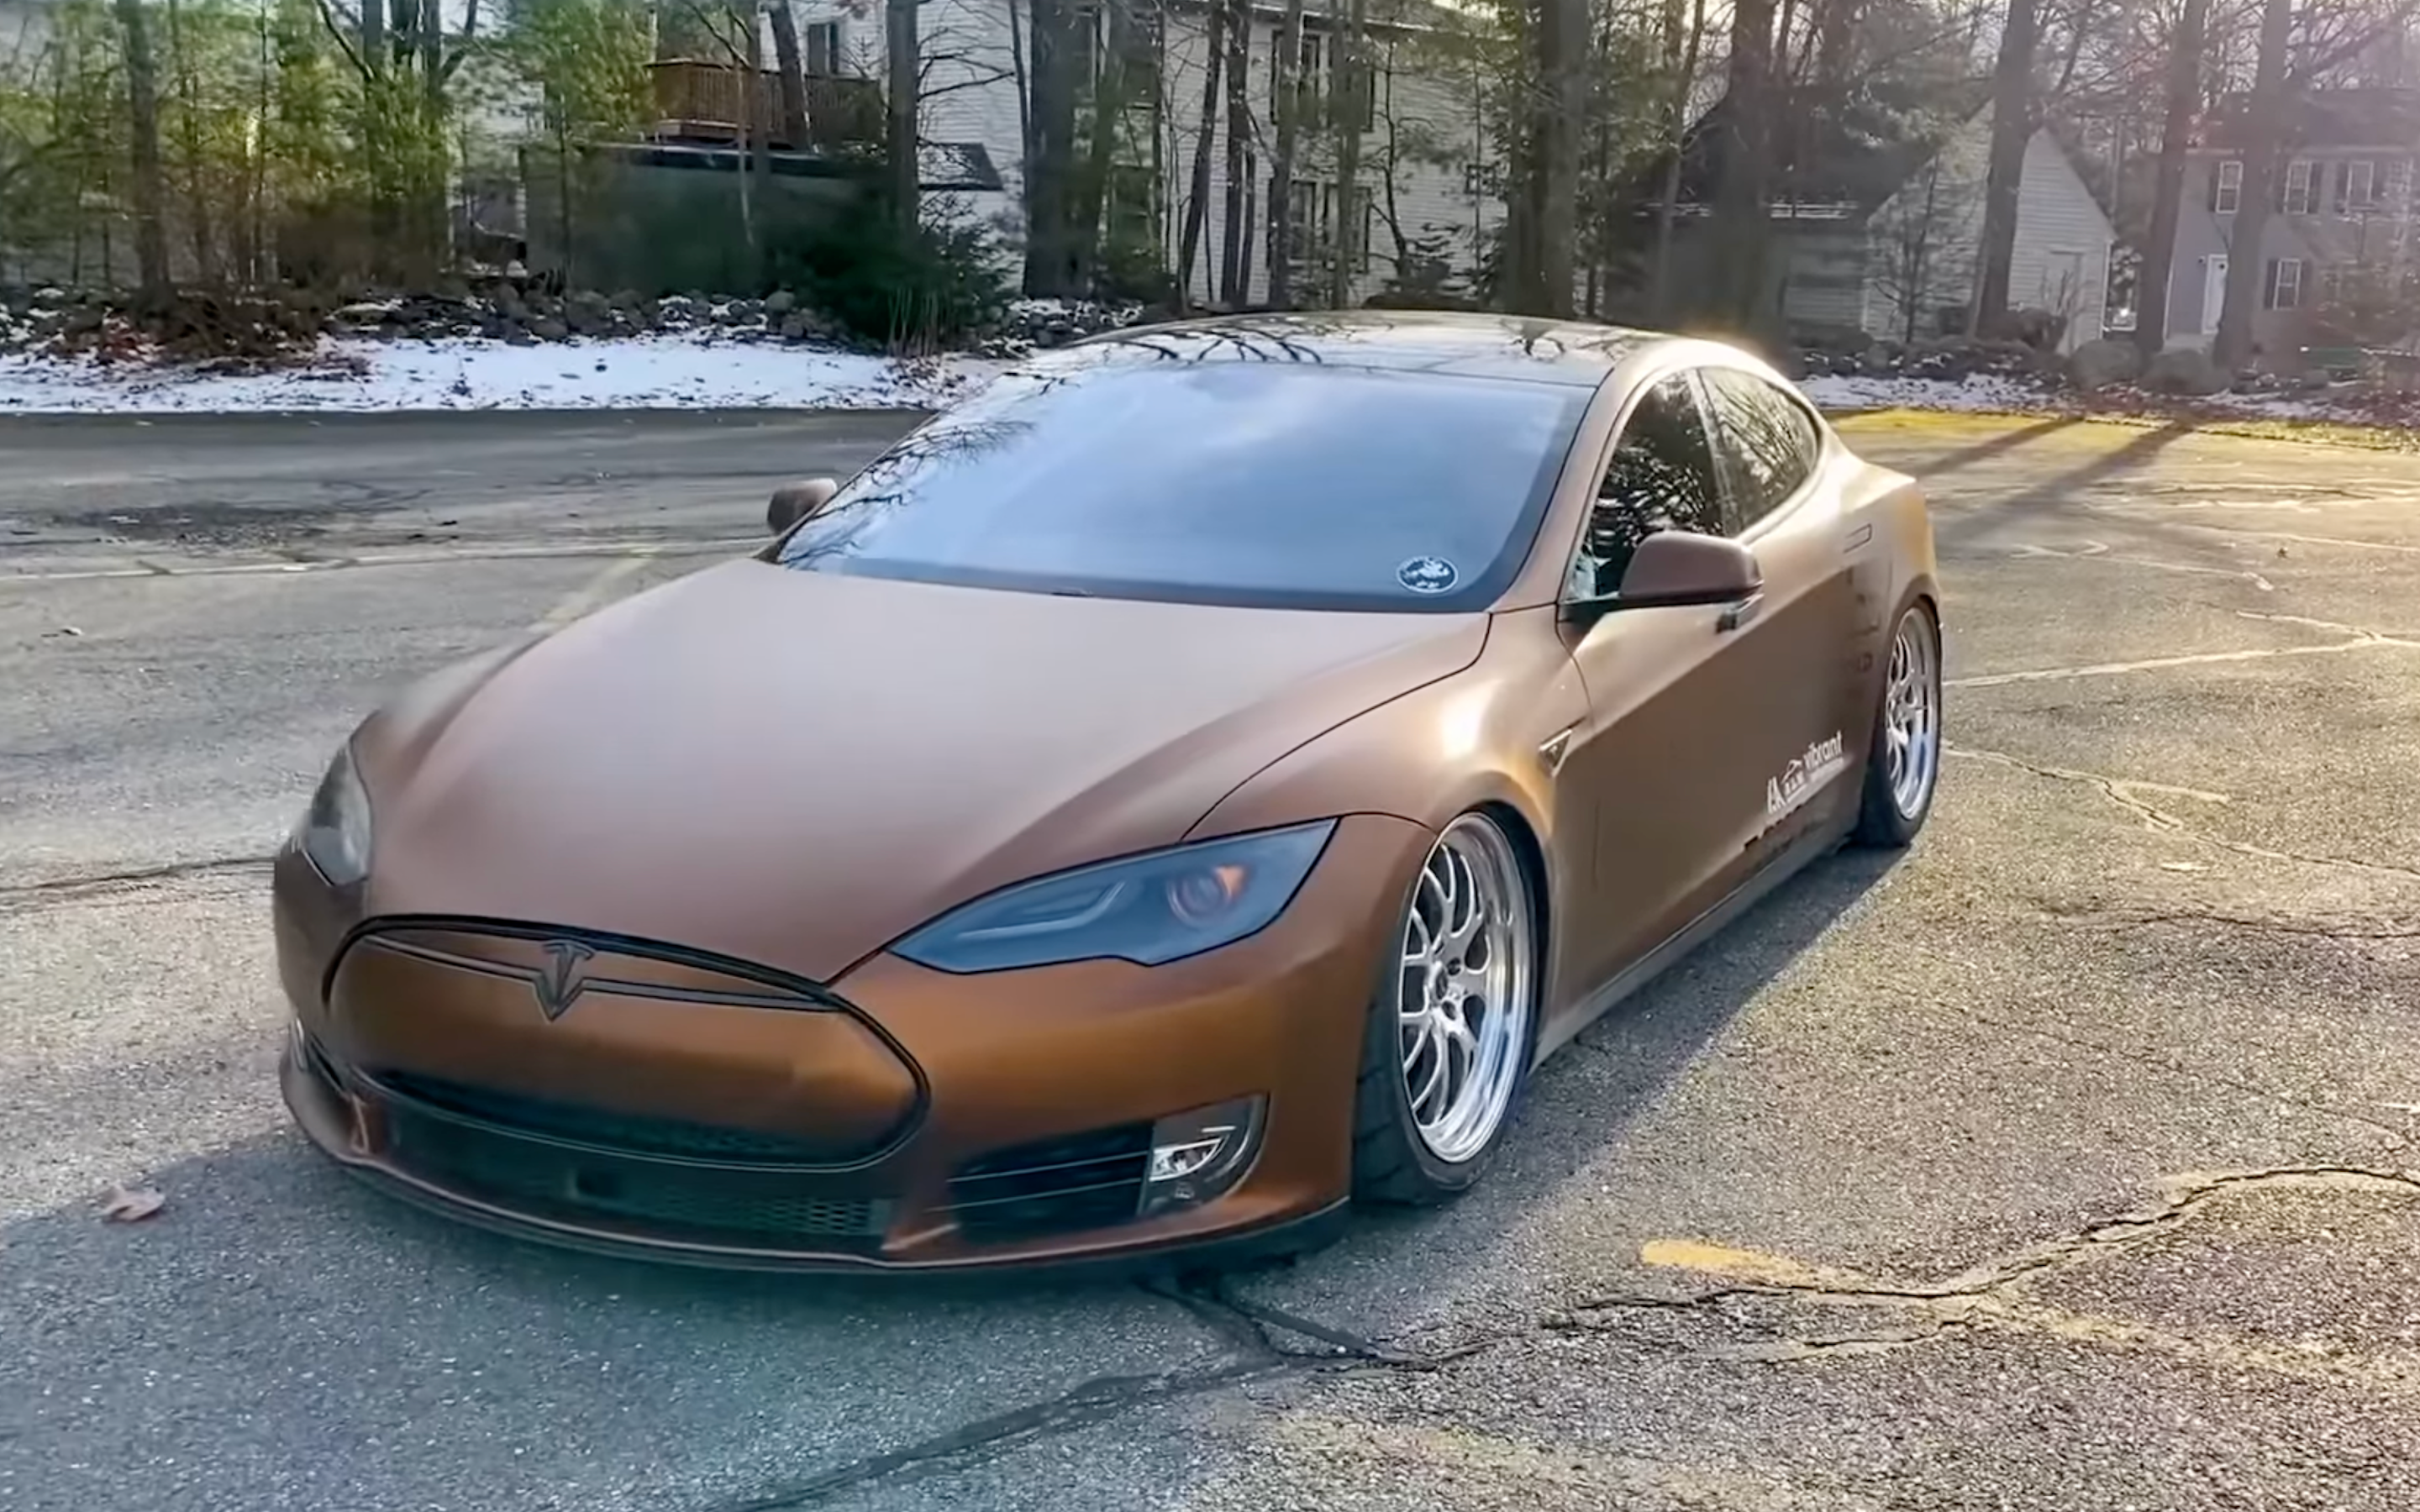 Rich Benoit's Brown Tesla V8 With Air Suspension